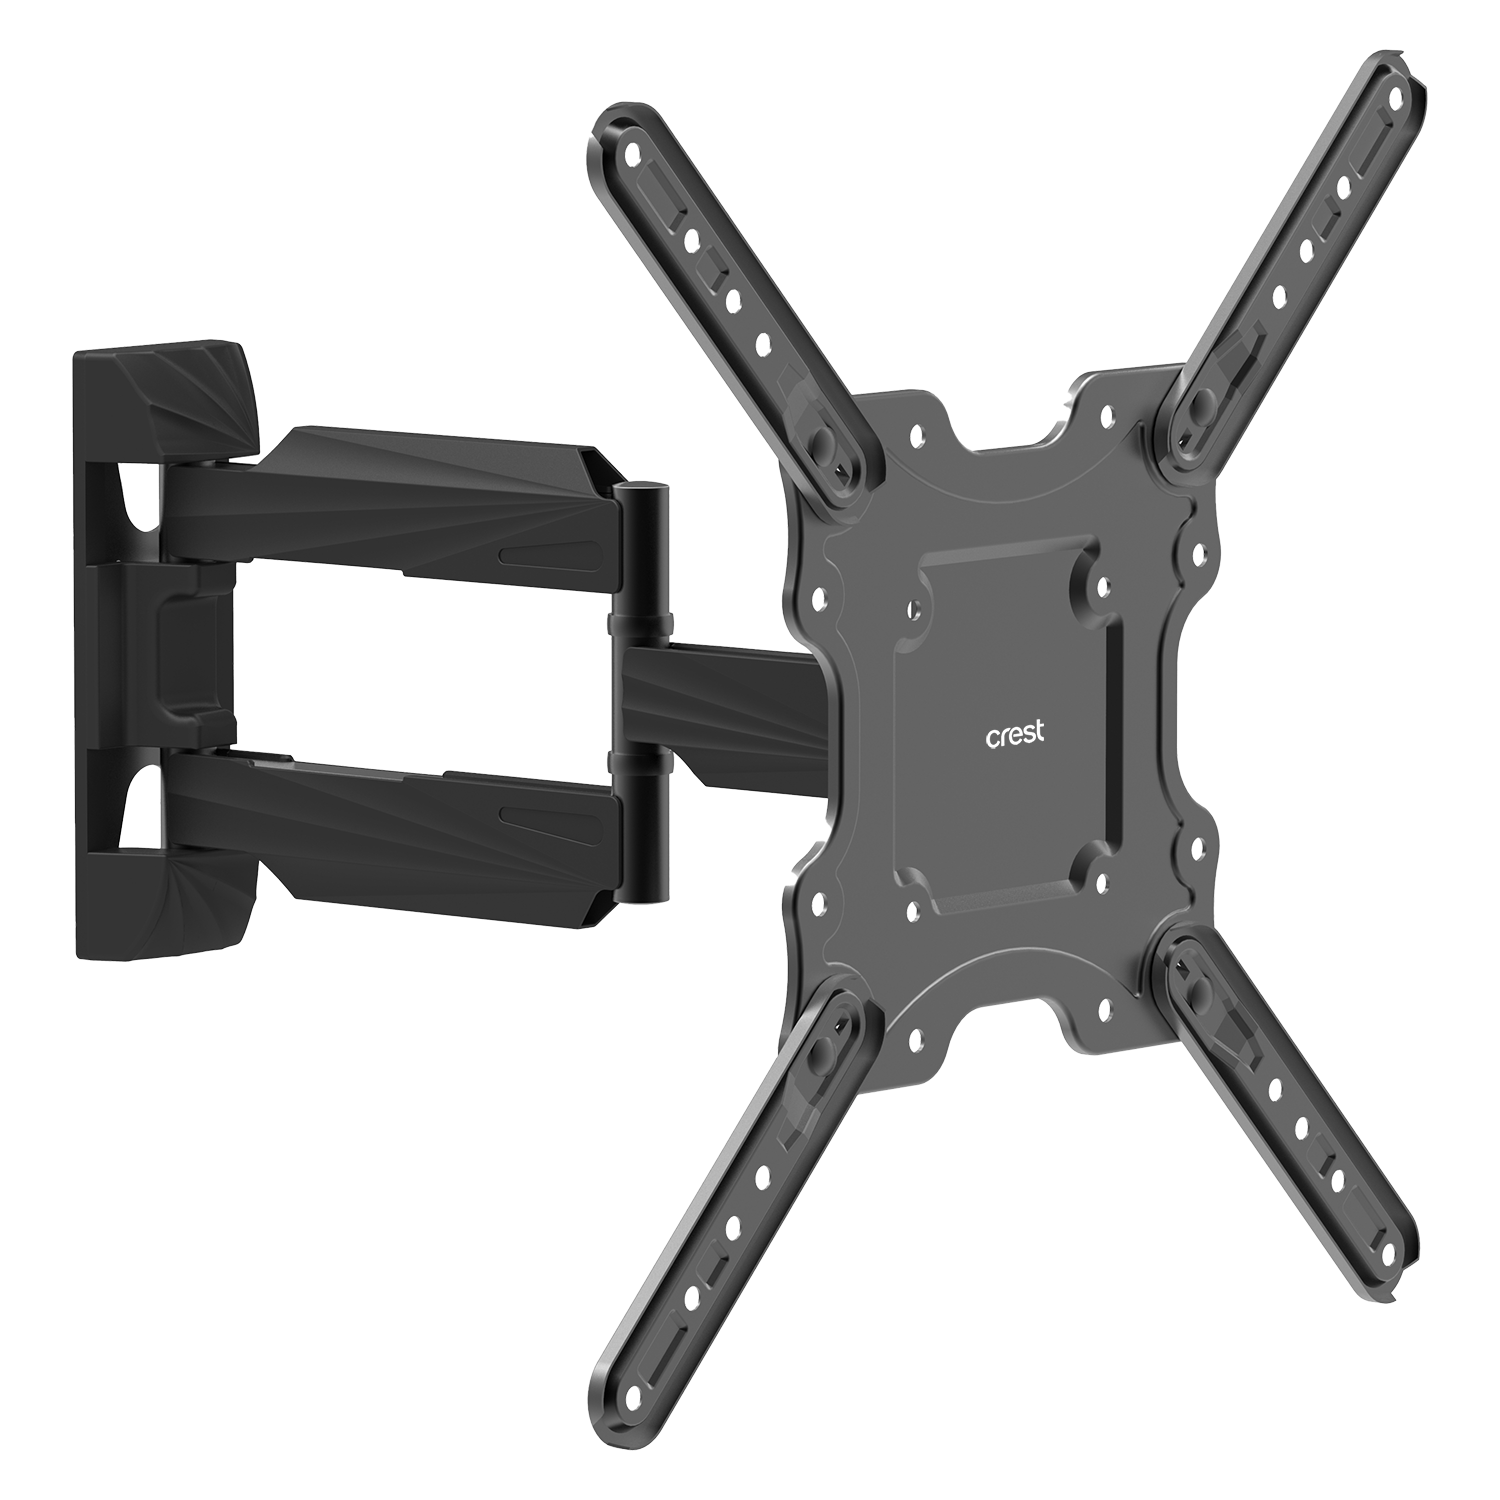 Full Motion TV Wall Mount - 20" to 55"